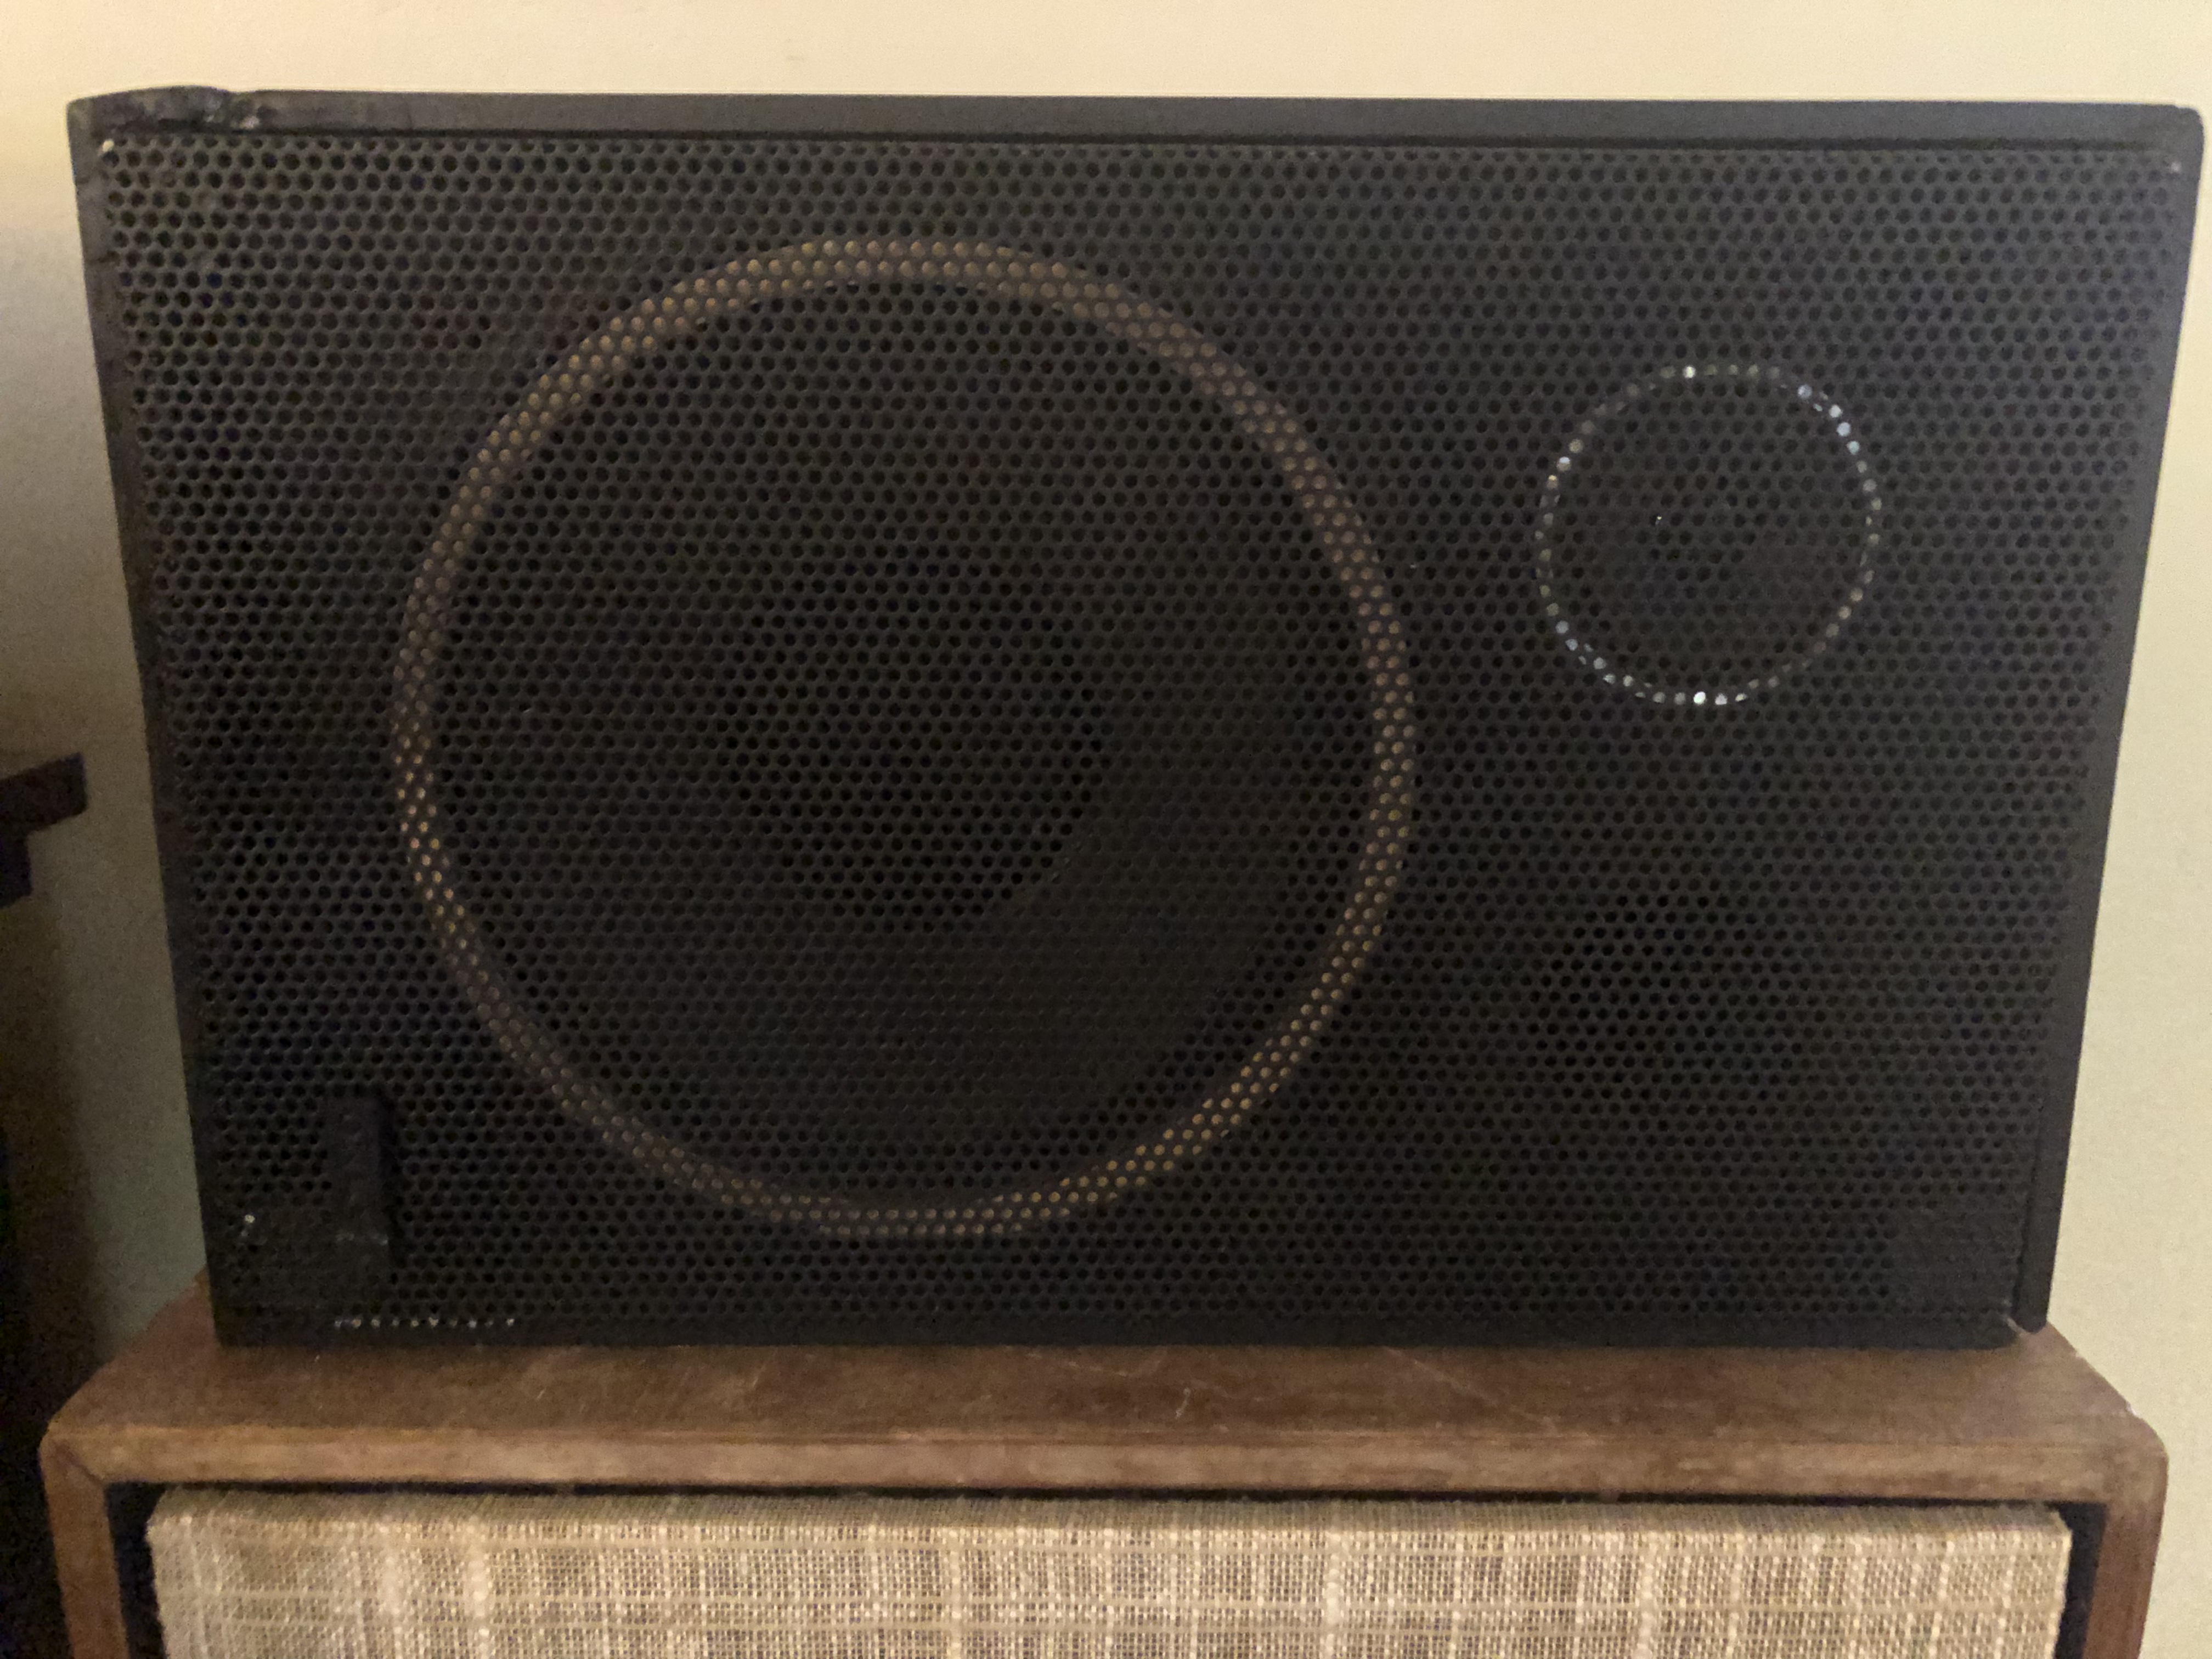 Name That Onkyo! - Speakers - HifiGuides Forums